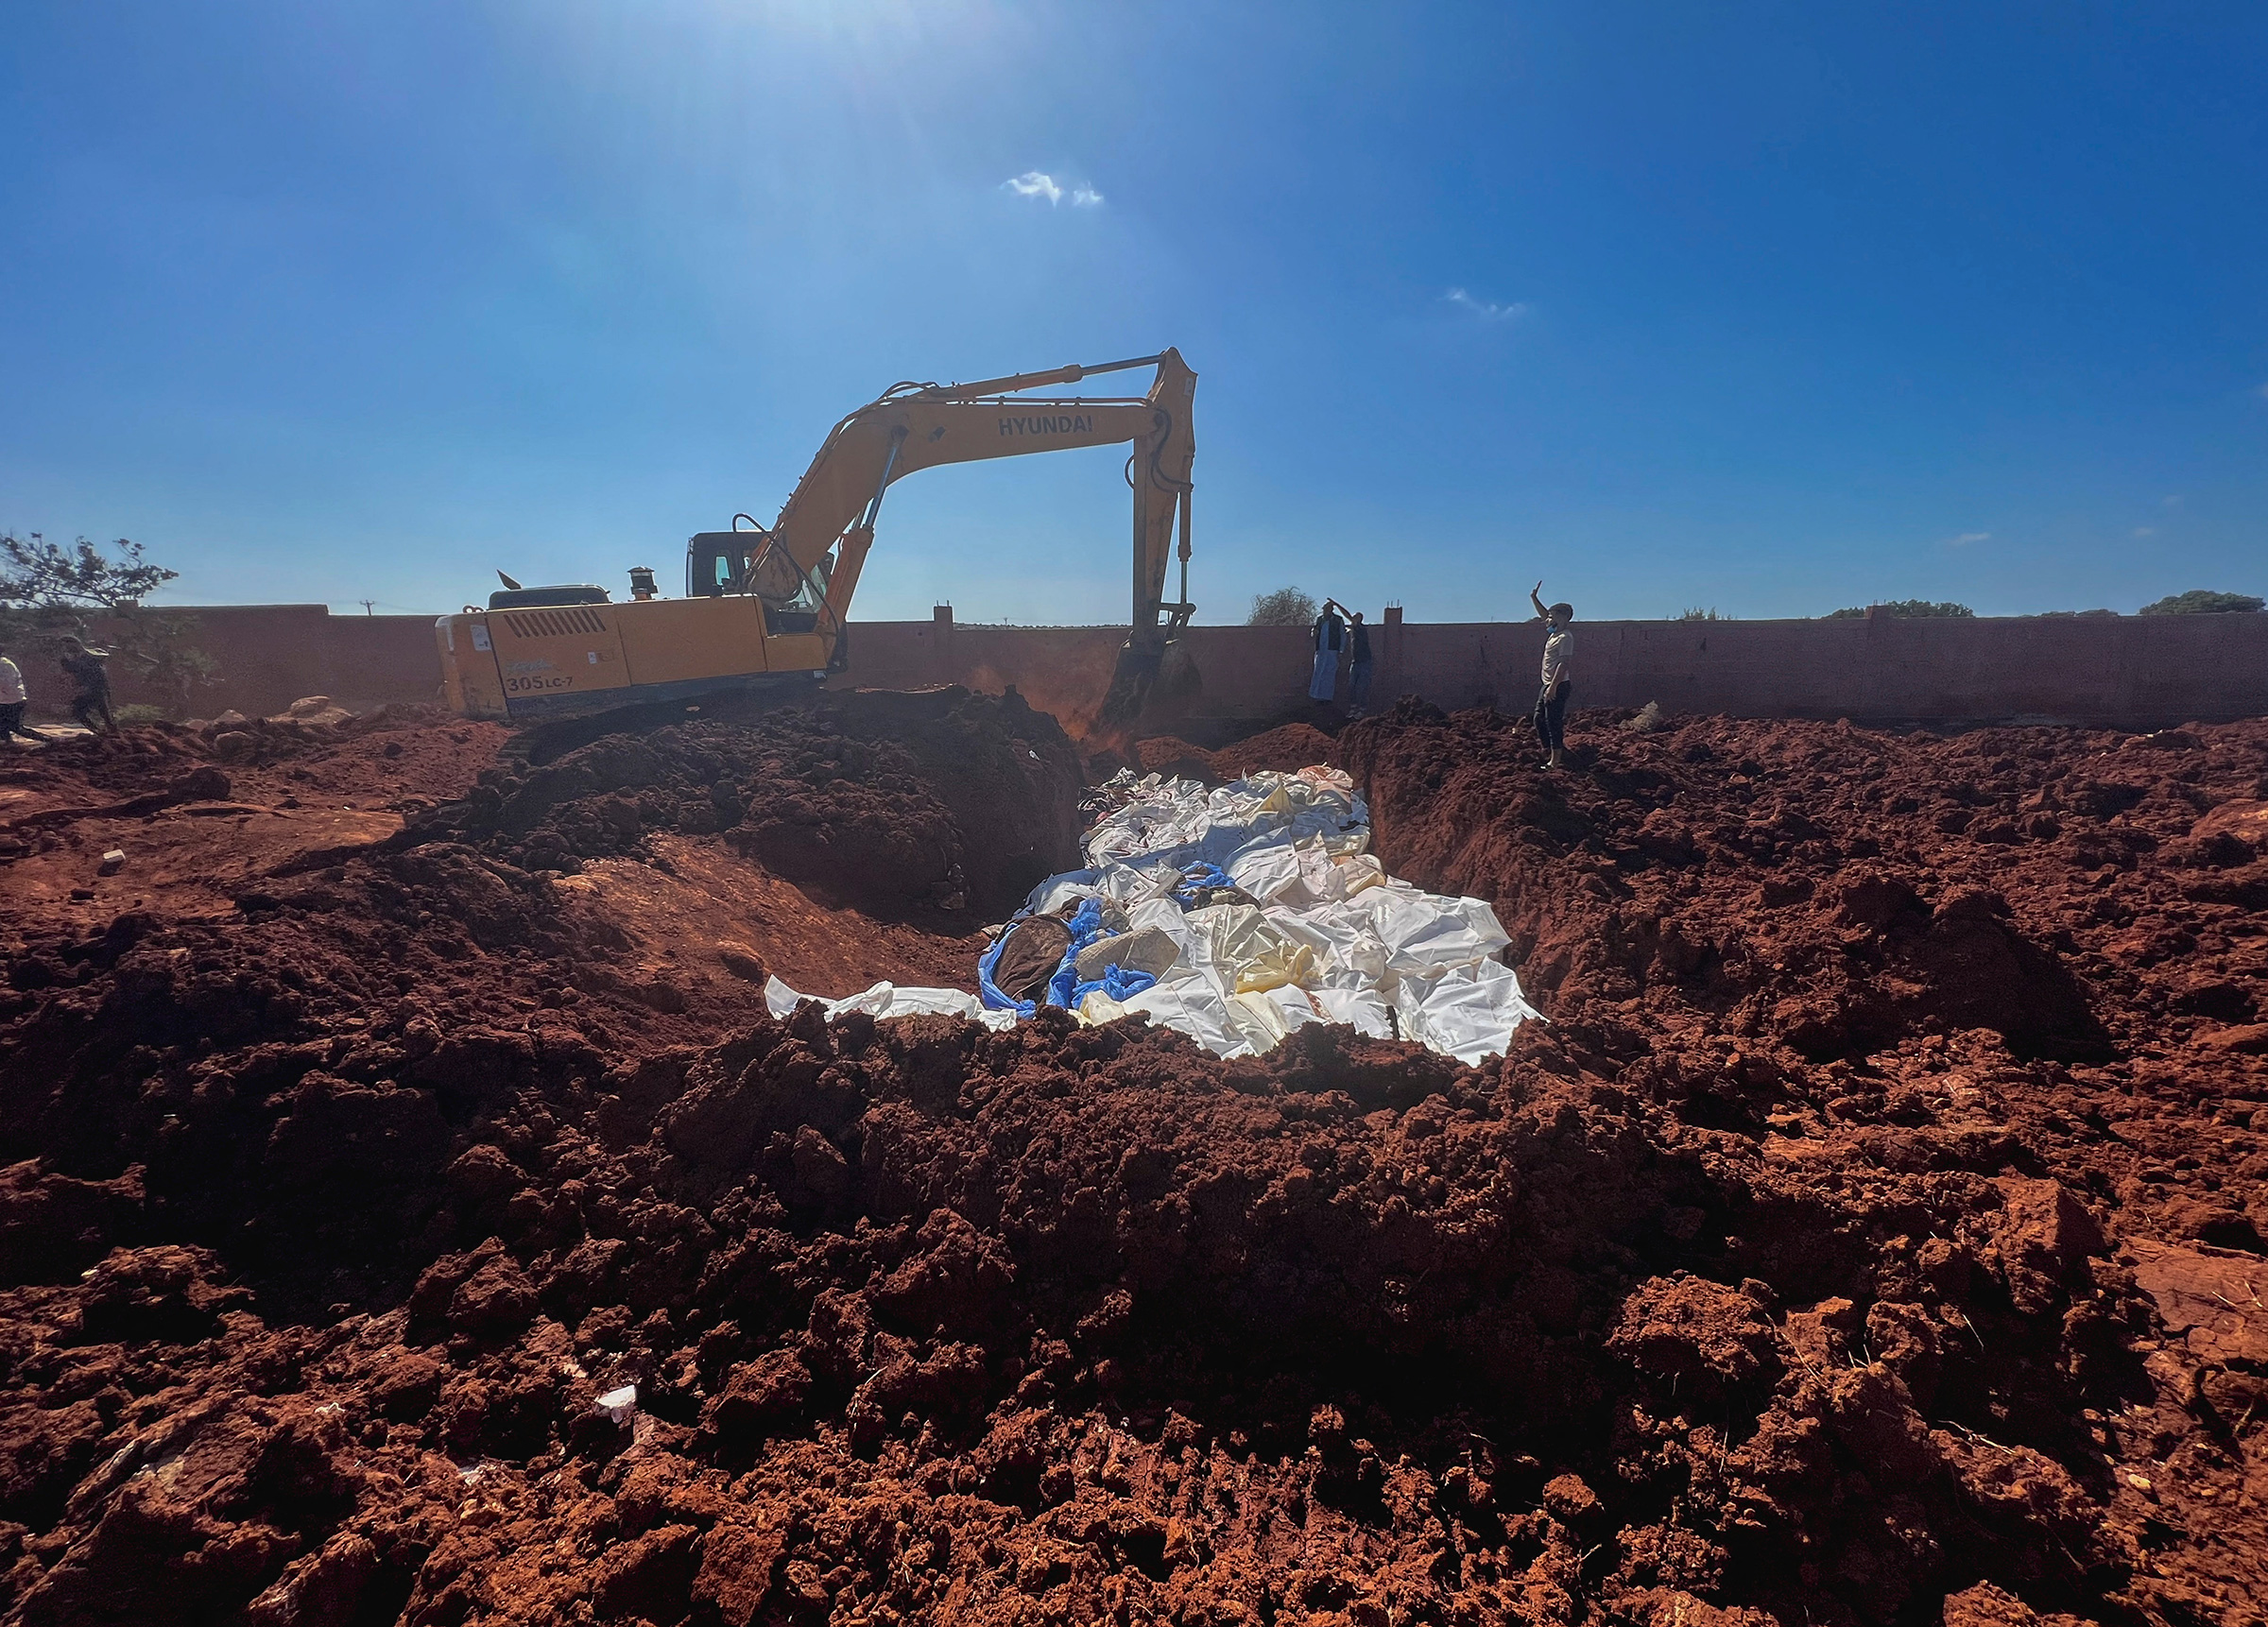 Bodies of victims are placed at a mass grave after a powerful storm and heavy rainfall hit Libya, in Derna on Sept. 12.